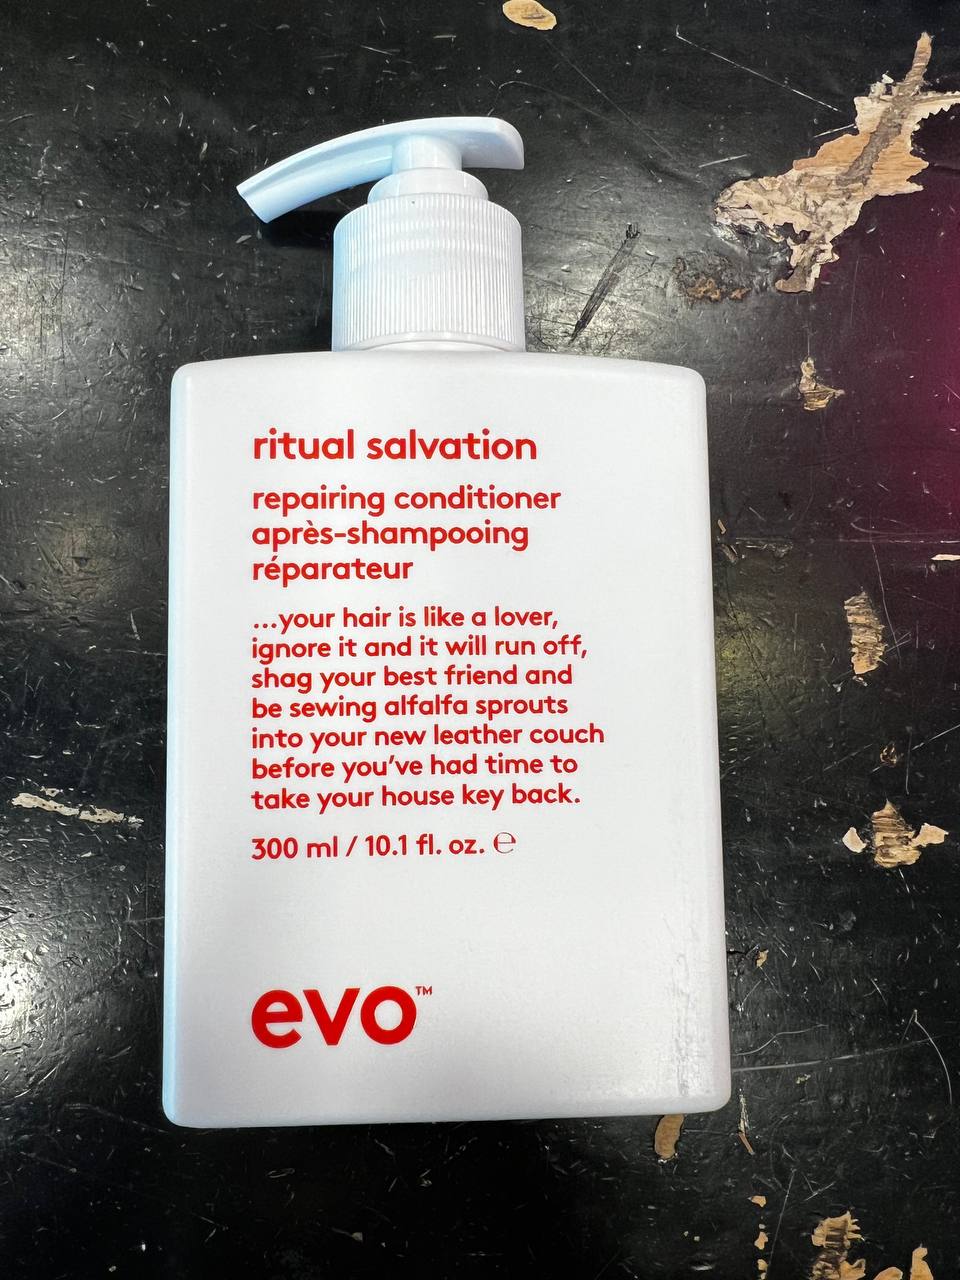 Ritual Salvation Repairing Conditioner by EVO Hair